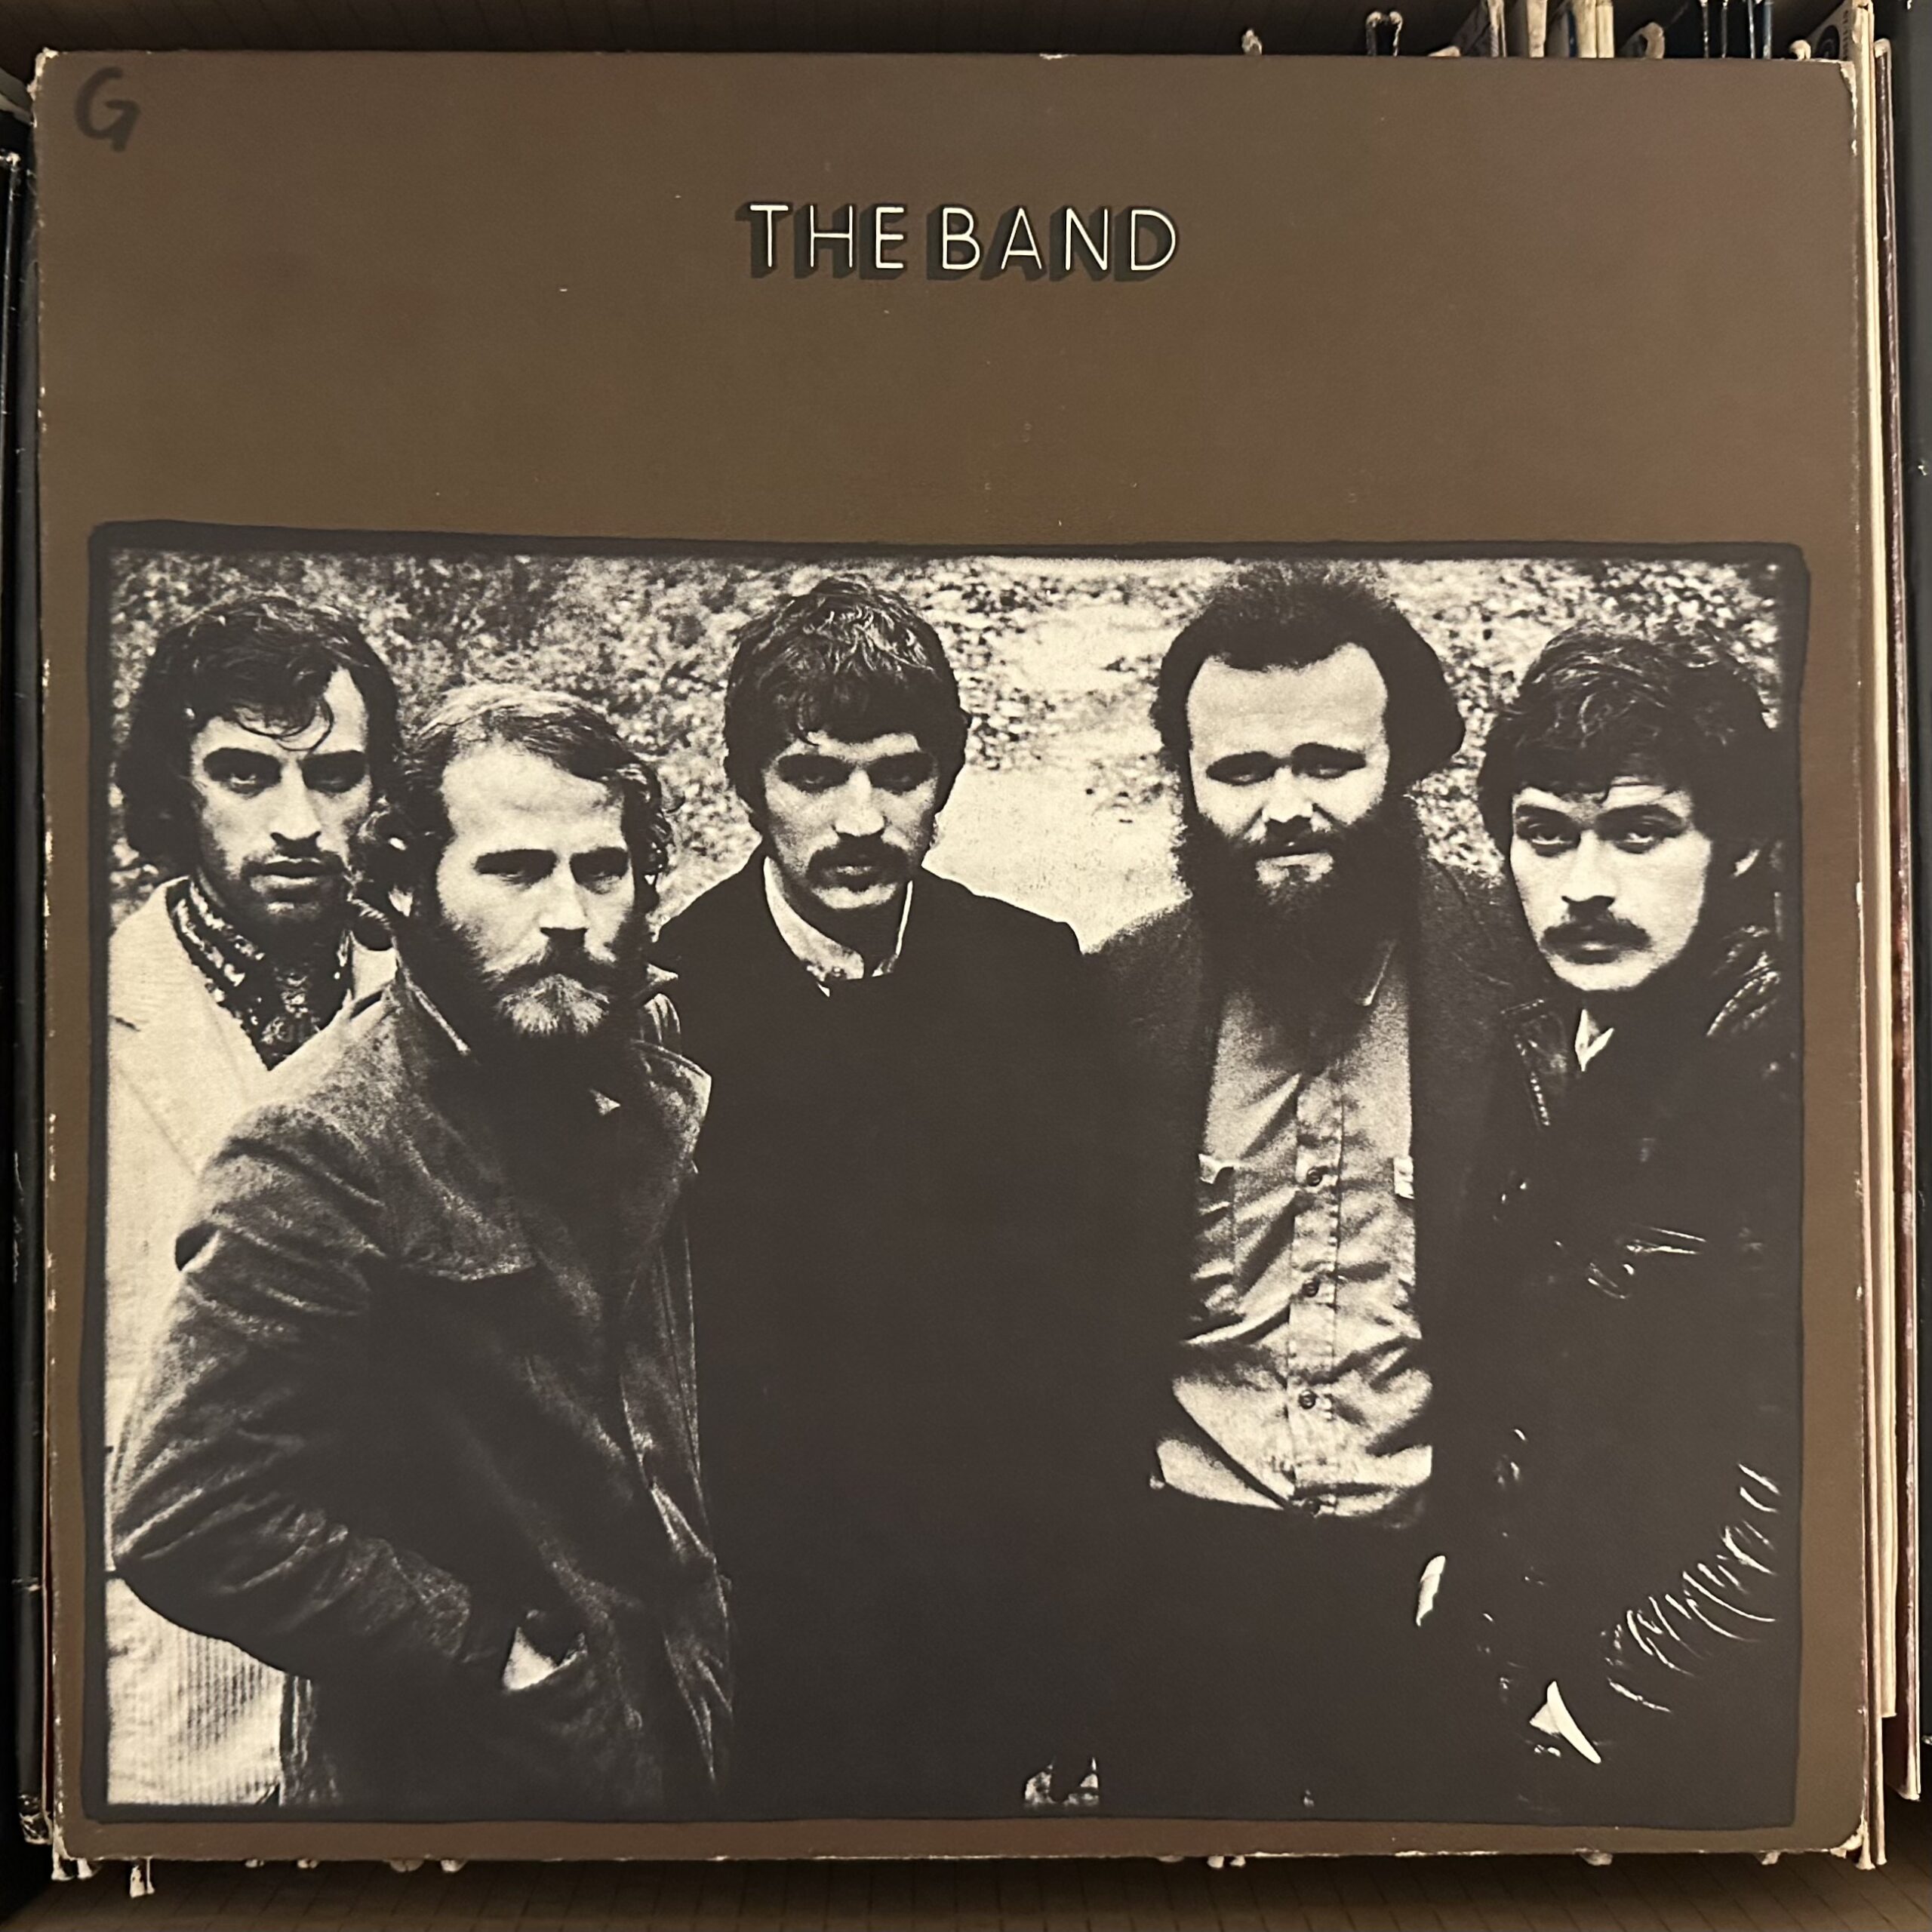 The Band (The Brown Album, 1969) by The Band